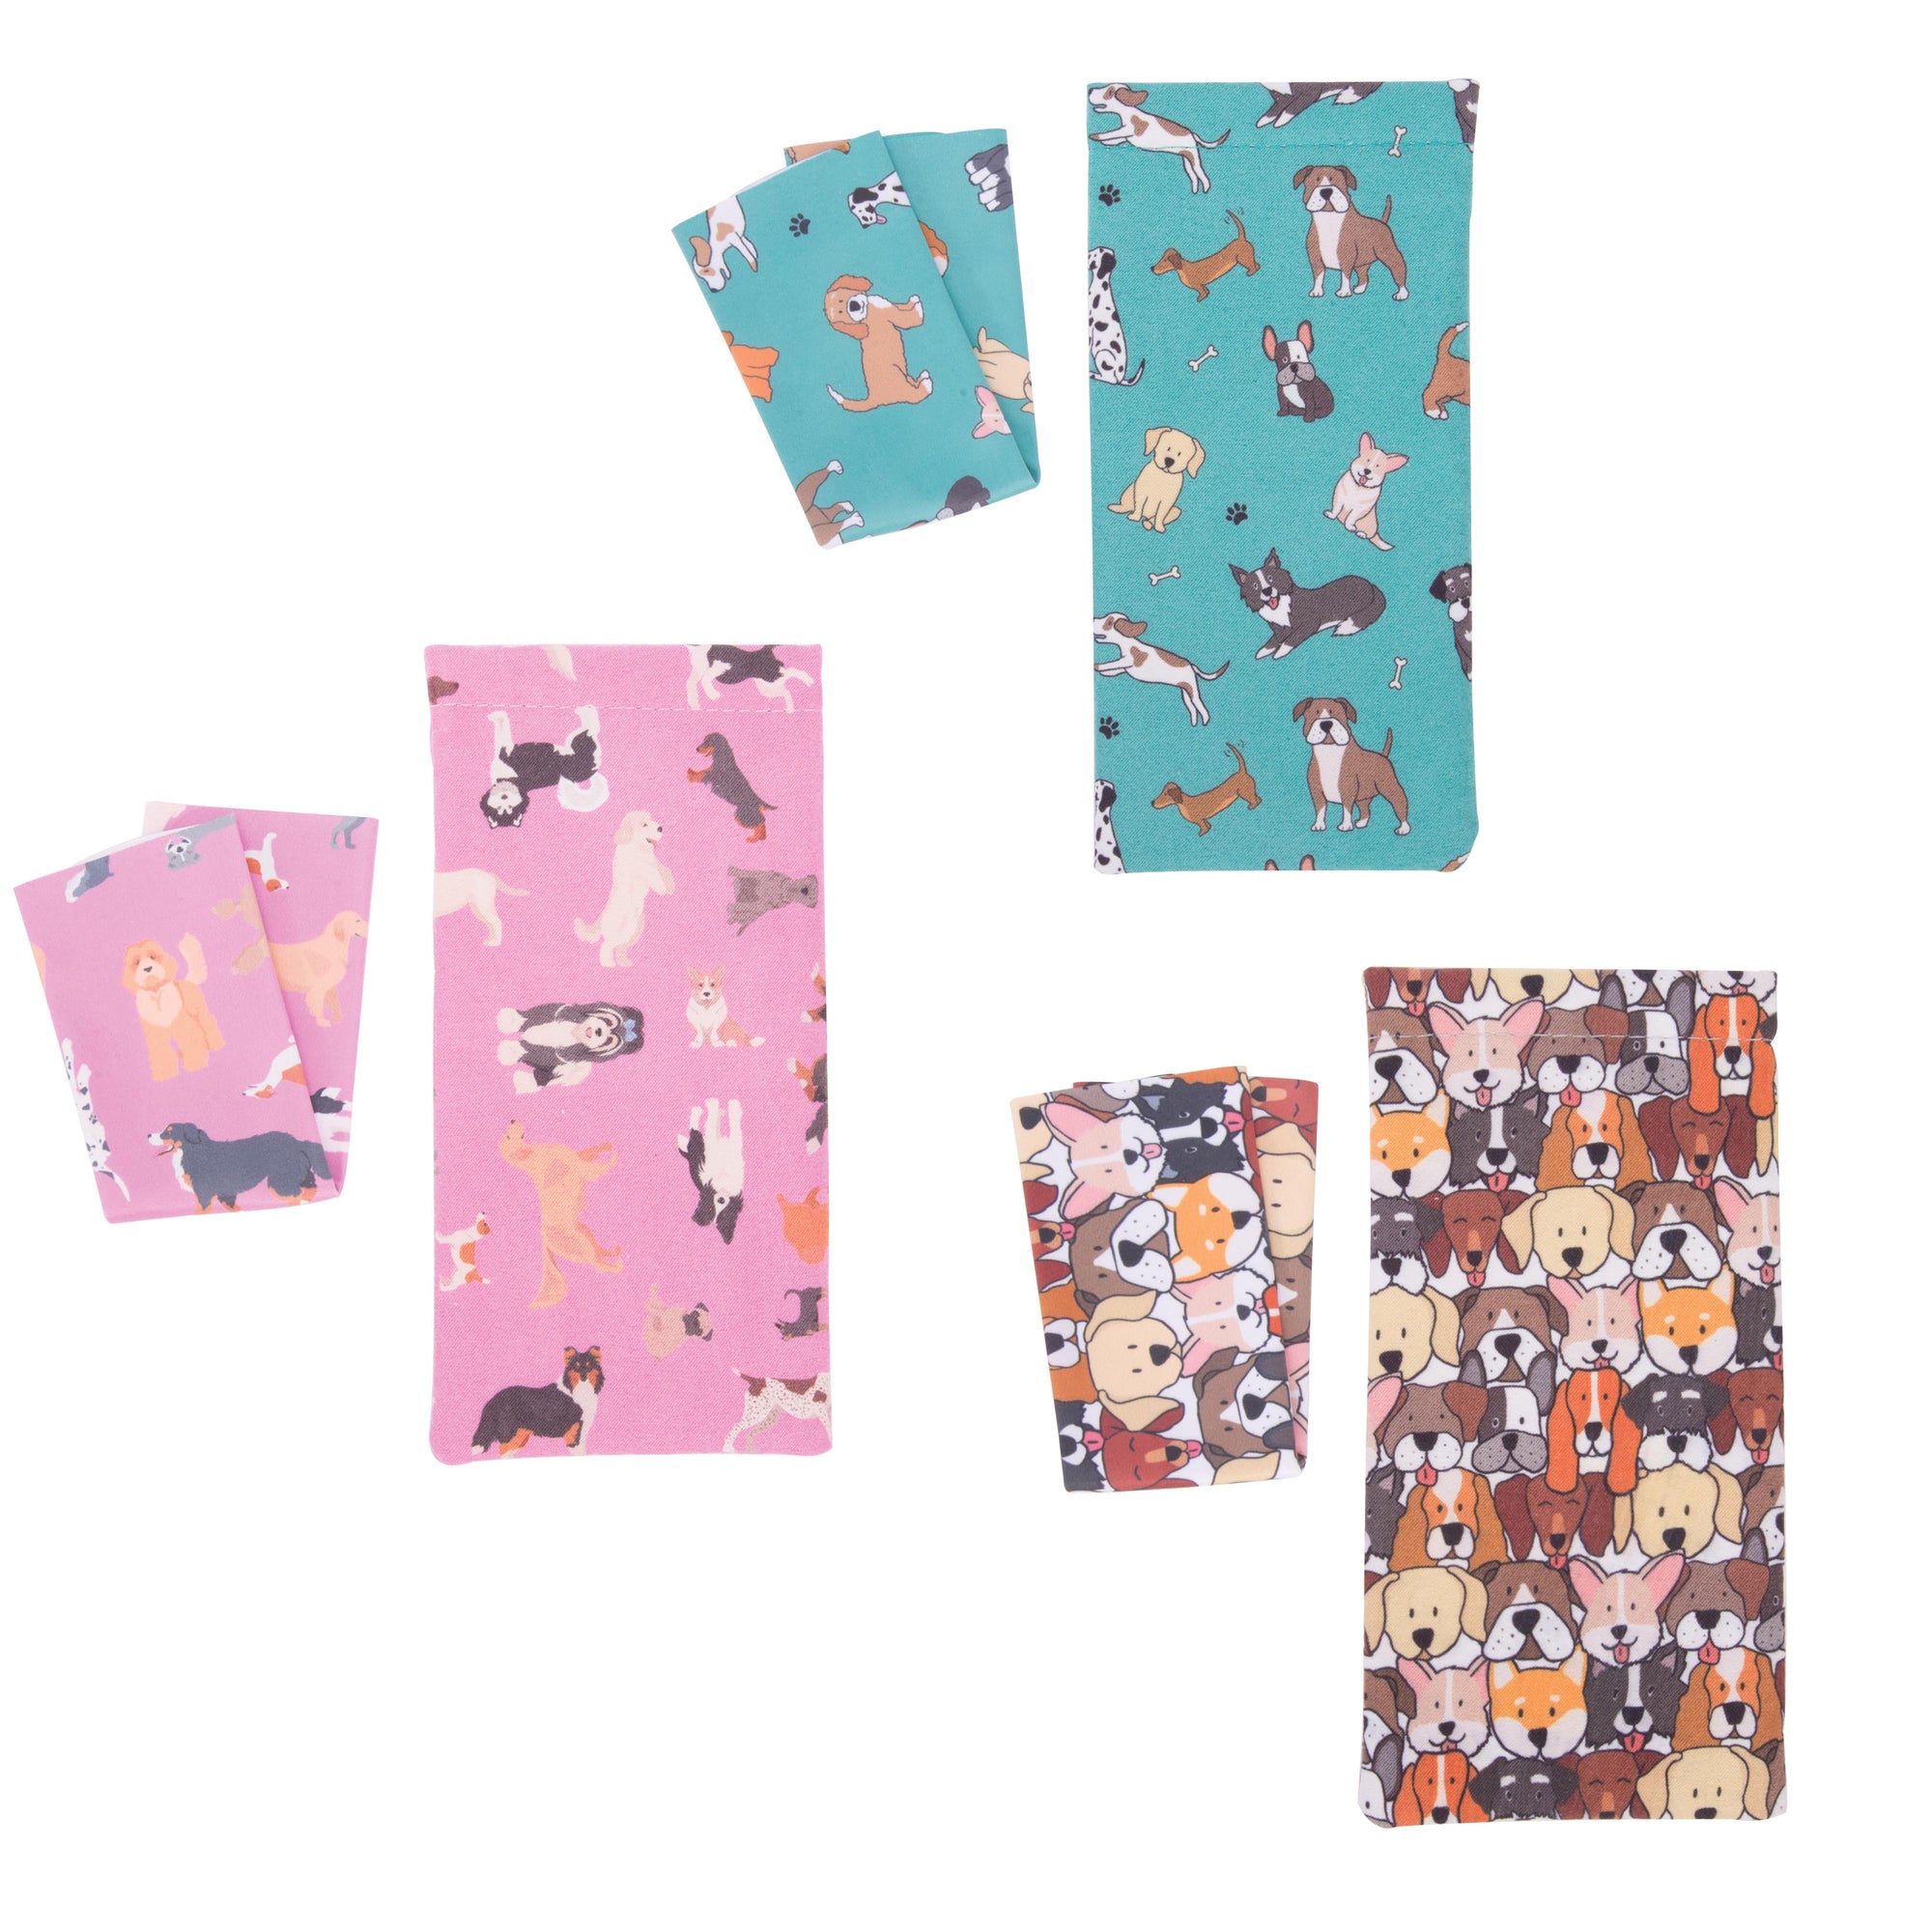 THE DOG COLLECTIVE SNAP SHUT GLASSES CASE &amp; CLEANING CLOTH ASSORTED